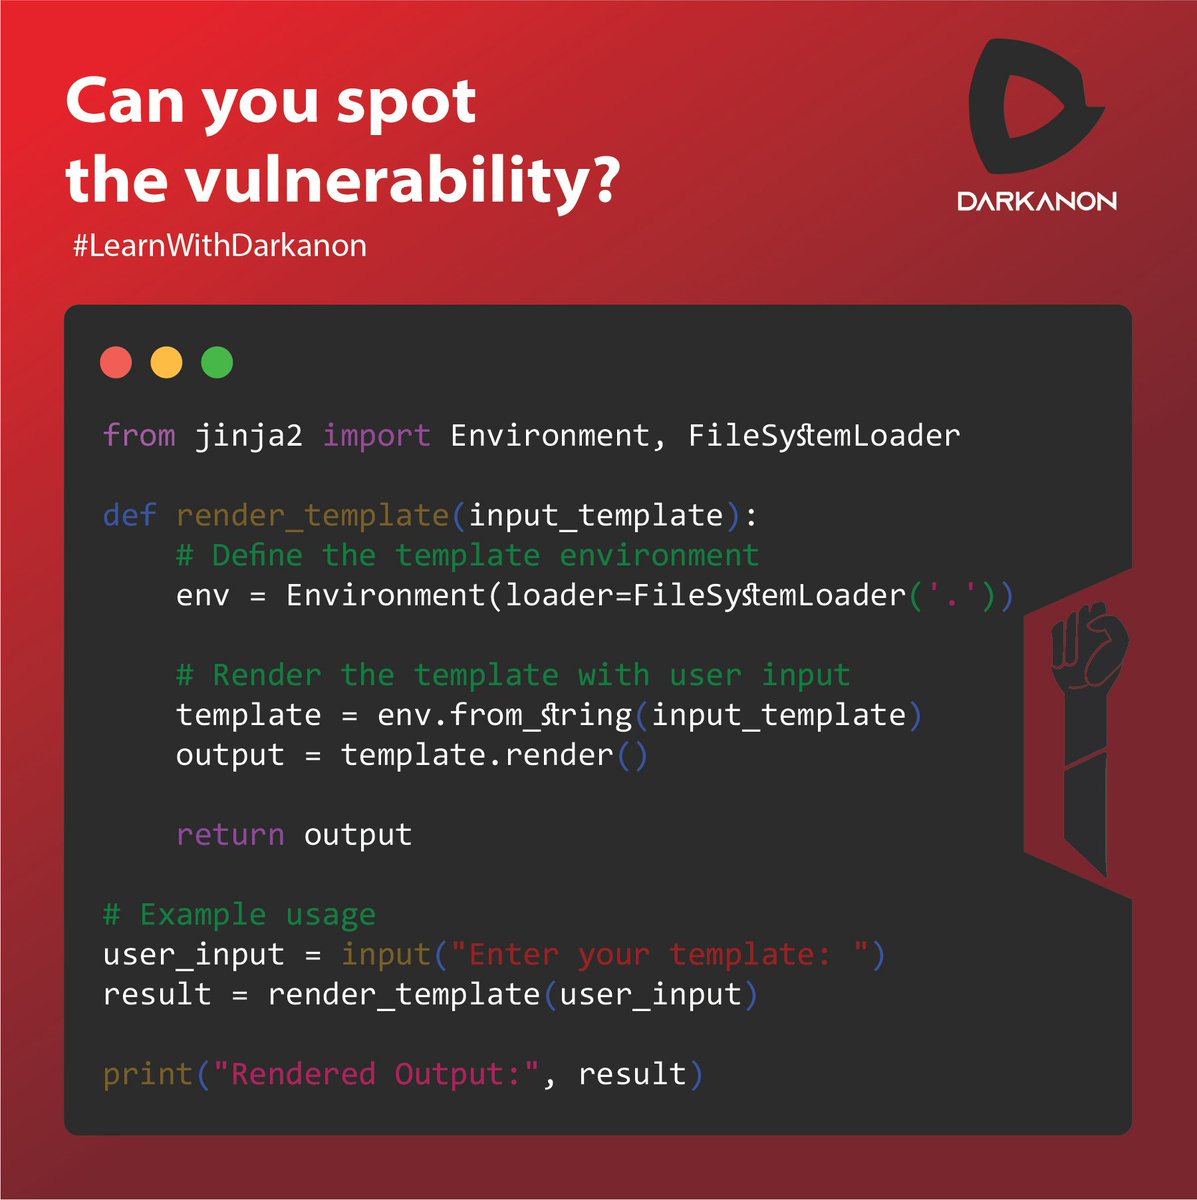 🔐 Can you spot the potential vulnerability in this code snippet? 🕵️‍♂️ Share your insights on how to secure it! Let's learn how to code securely and strengthen our cybersecurity skills together💪 

#CyberSecurityChallenge #SecureCoding #LearningTogether #LearnWithDarkanon